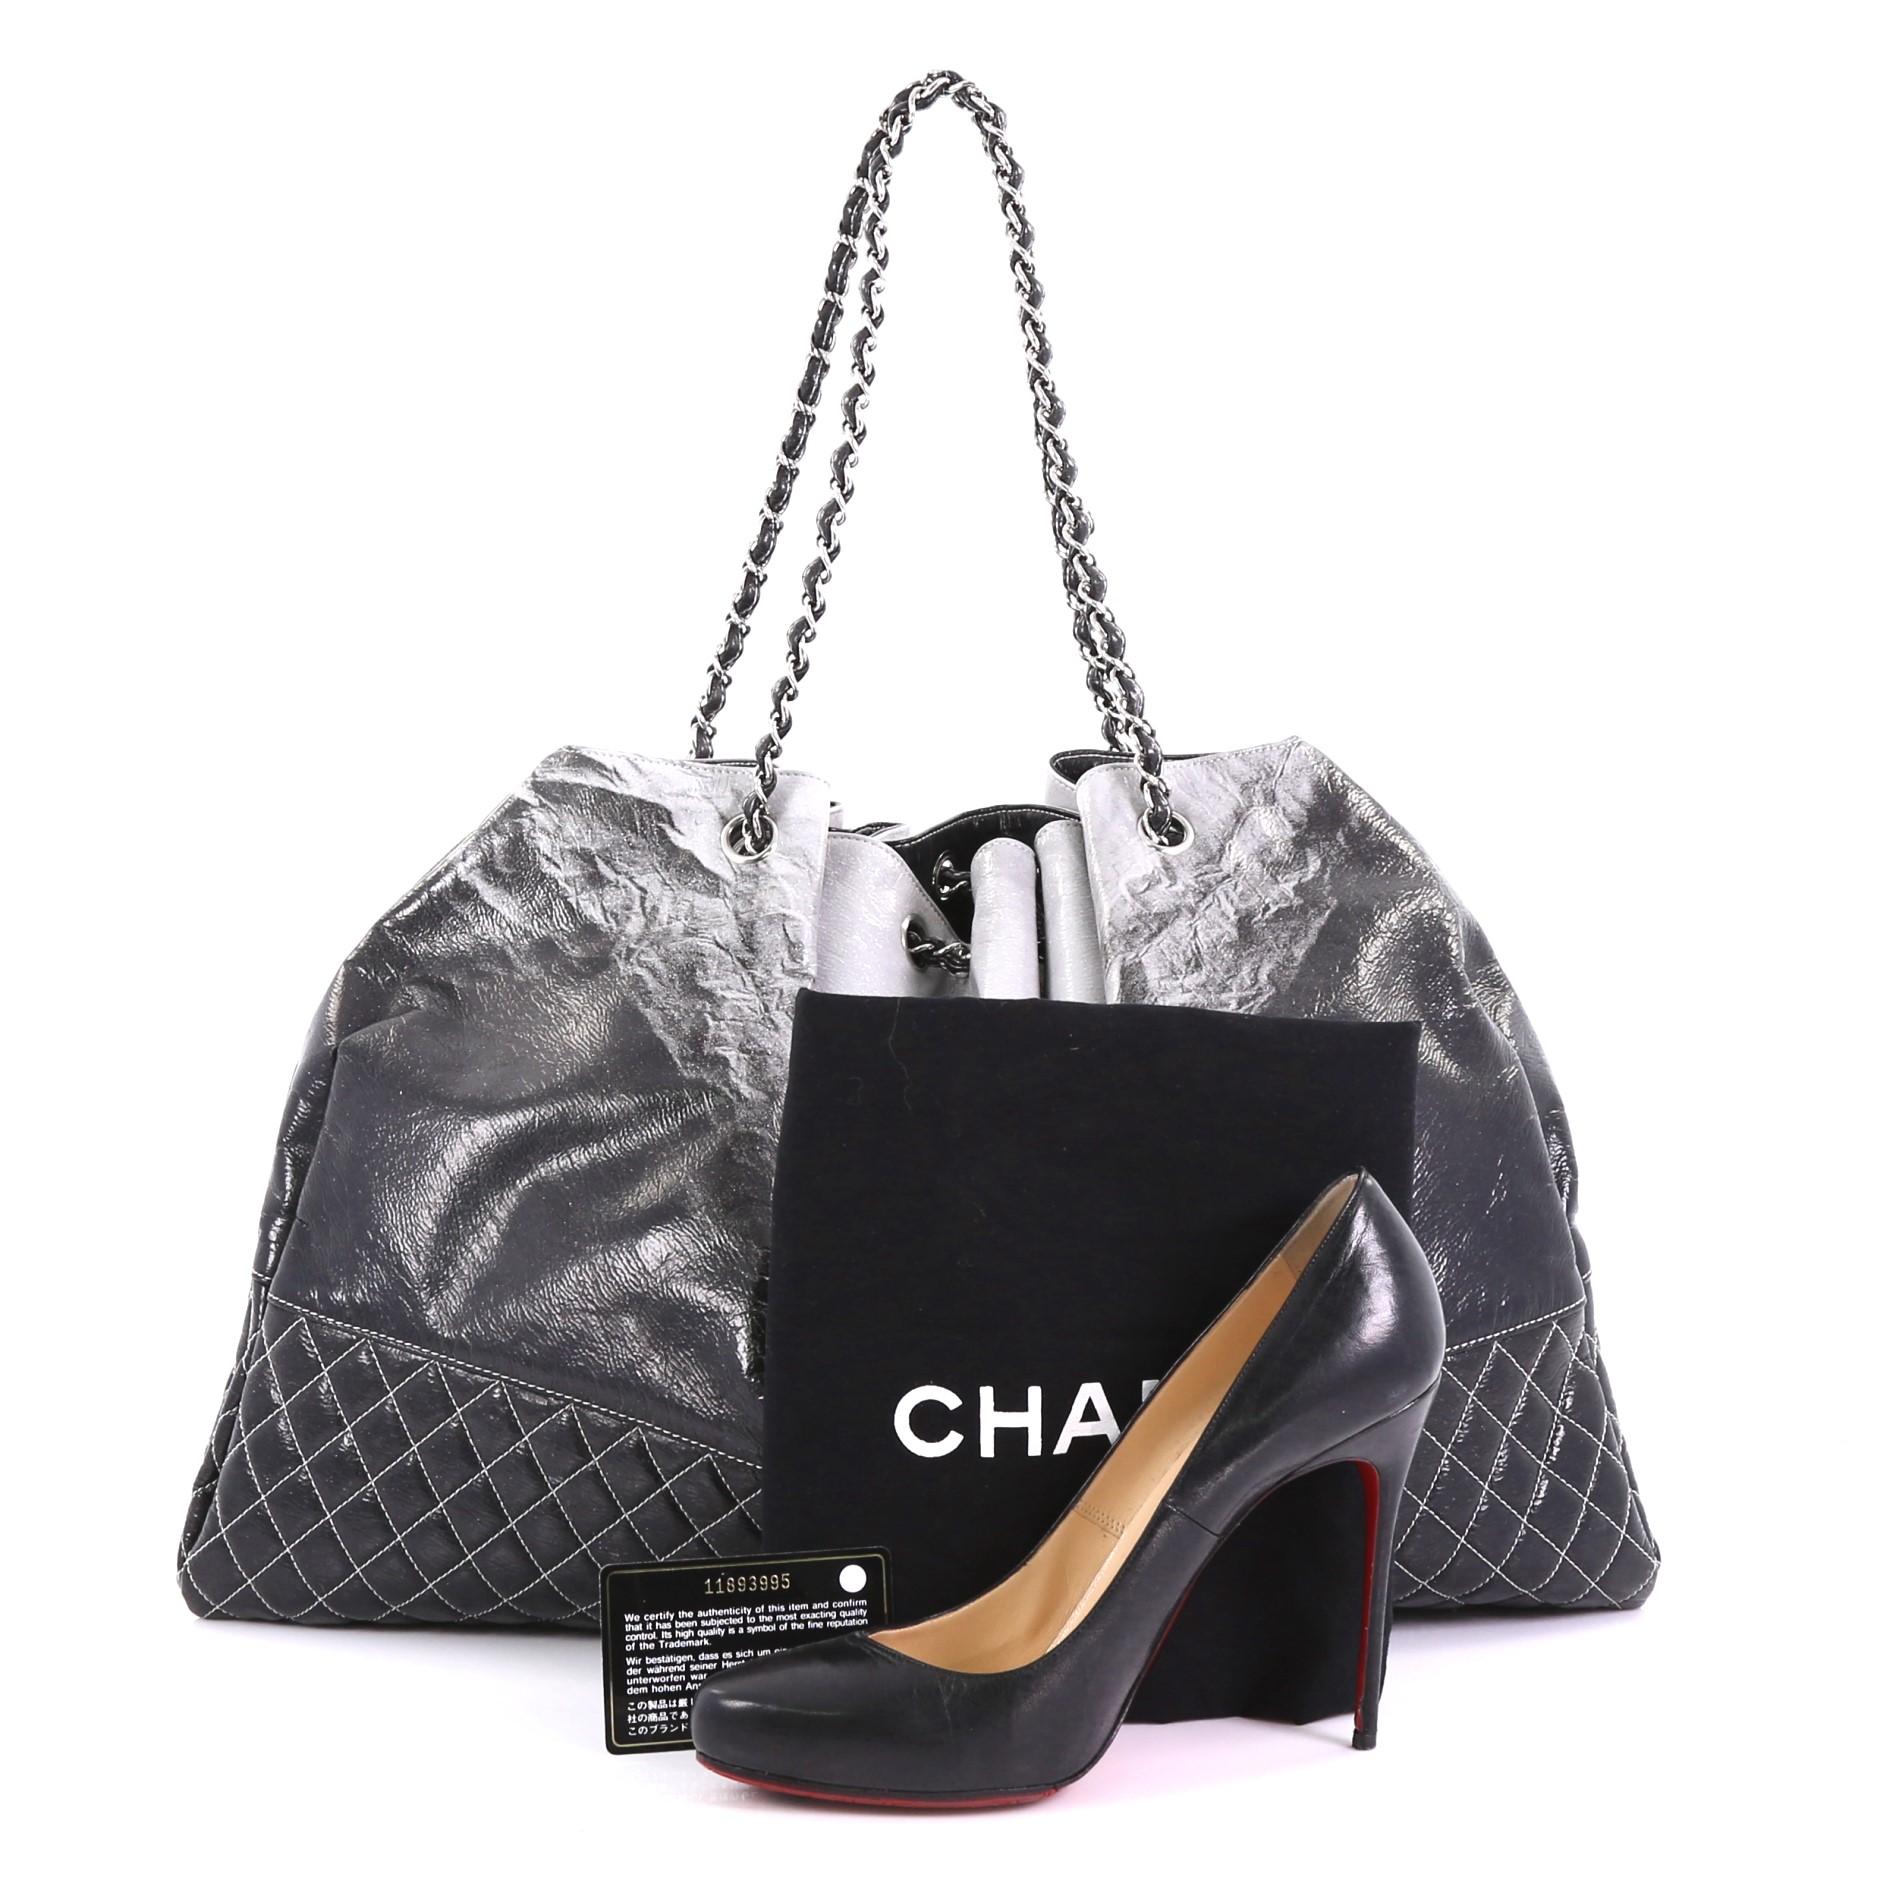 This Chanel Melrose Degrade Cabas Tote Patent, crafted in black and gray patent leather, features woven in leather chain link strap, pleated silhouette, and silver-tone hardware. It opens to a gray nylon interior with slip pocket. Hologram sticker